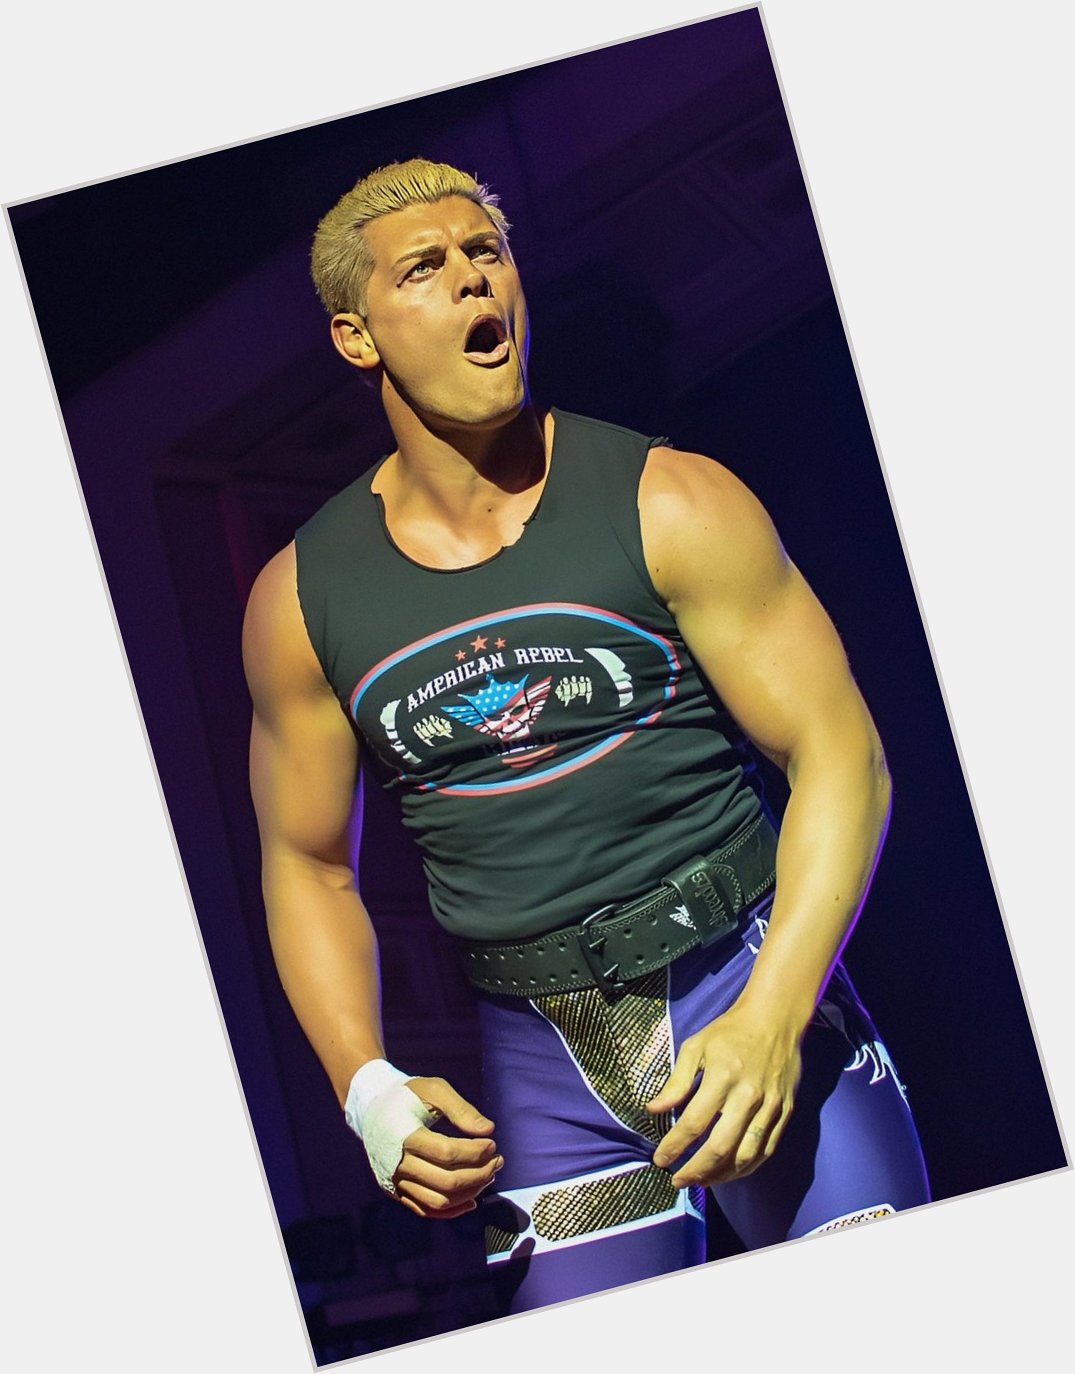 Happy birthday to the American night mare cody rhodes I hope you enjoy your day god bless you  